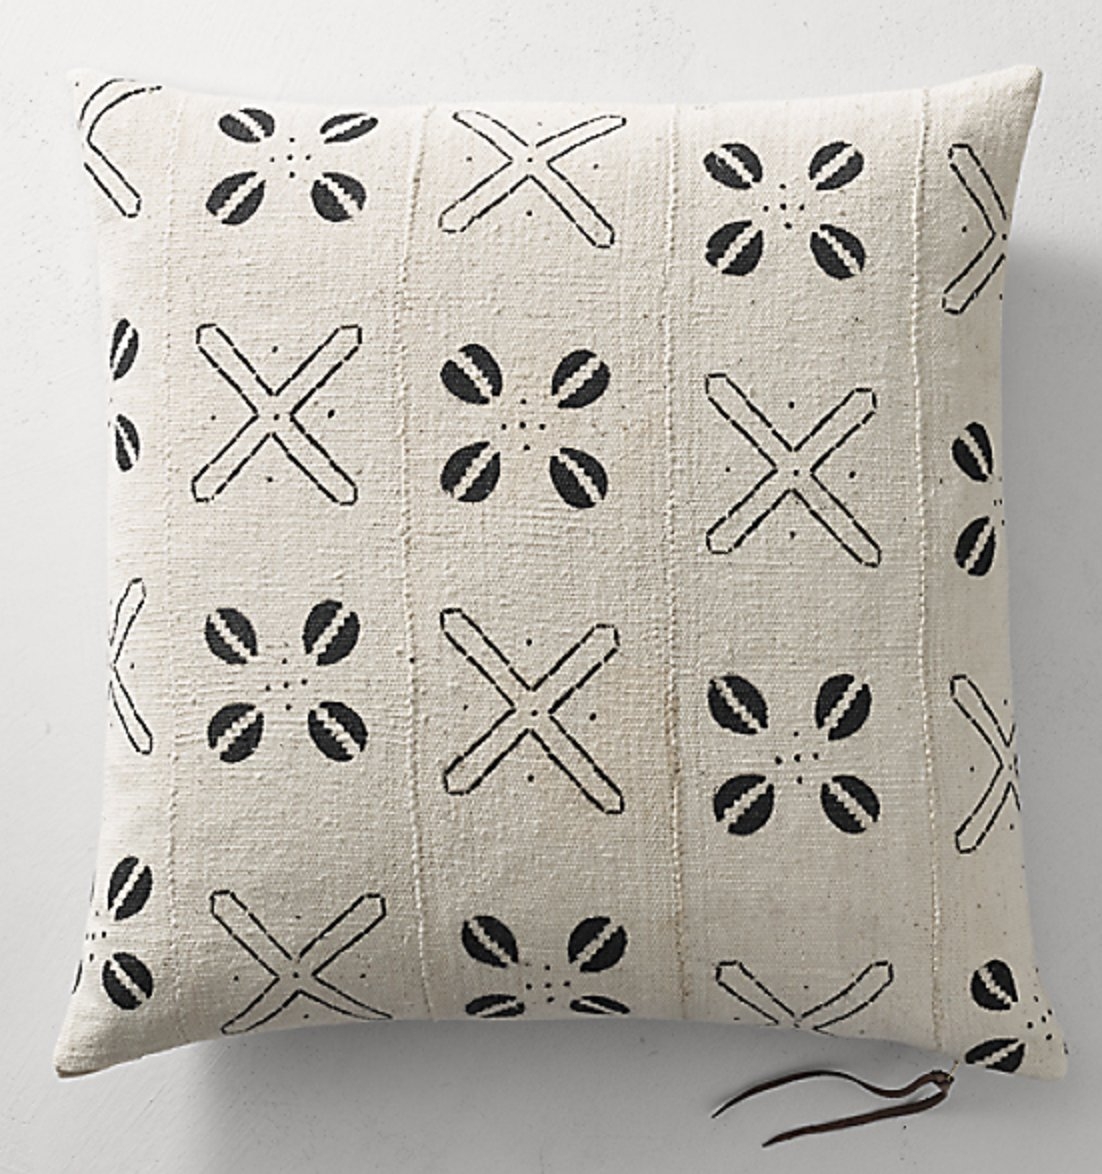 HANDWOVEN AFRICAN MUD CLOTH COWRIE CLUSTER PILLOW COVER - NATURAL - Image 0